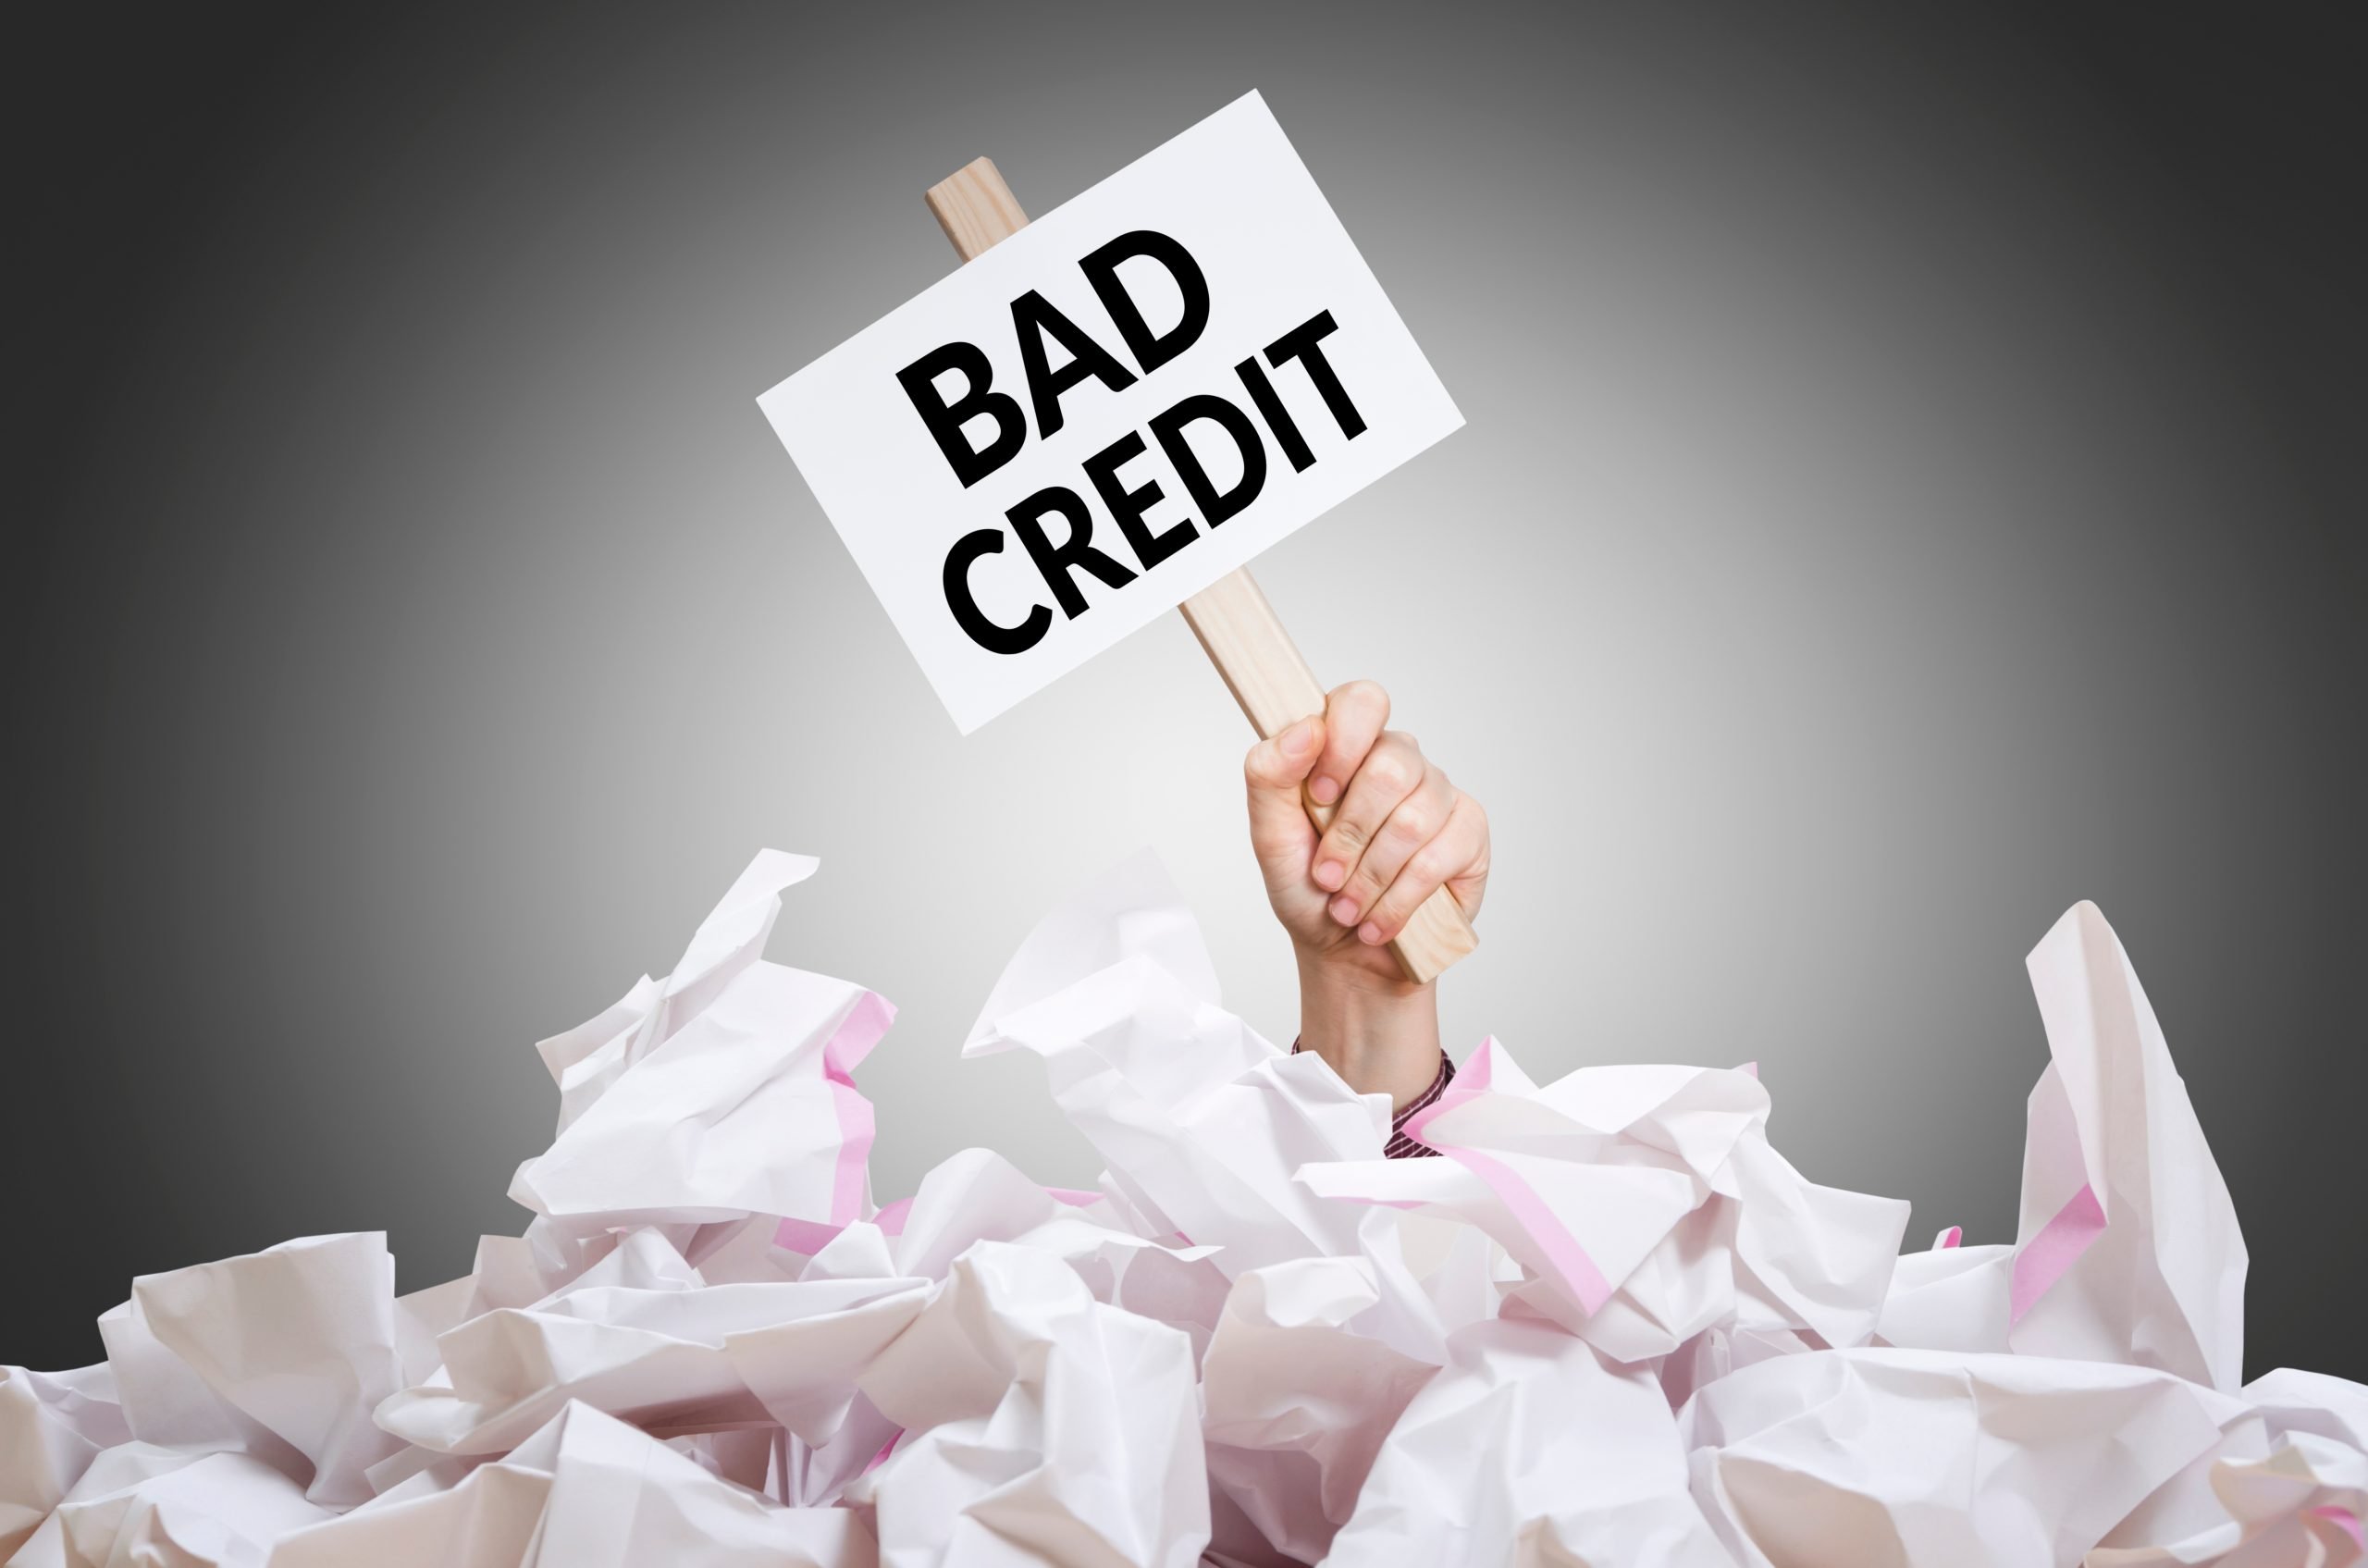 Bad credit placard in hand with crumpled paper pile